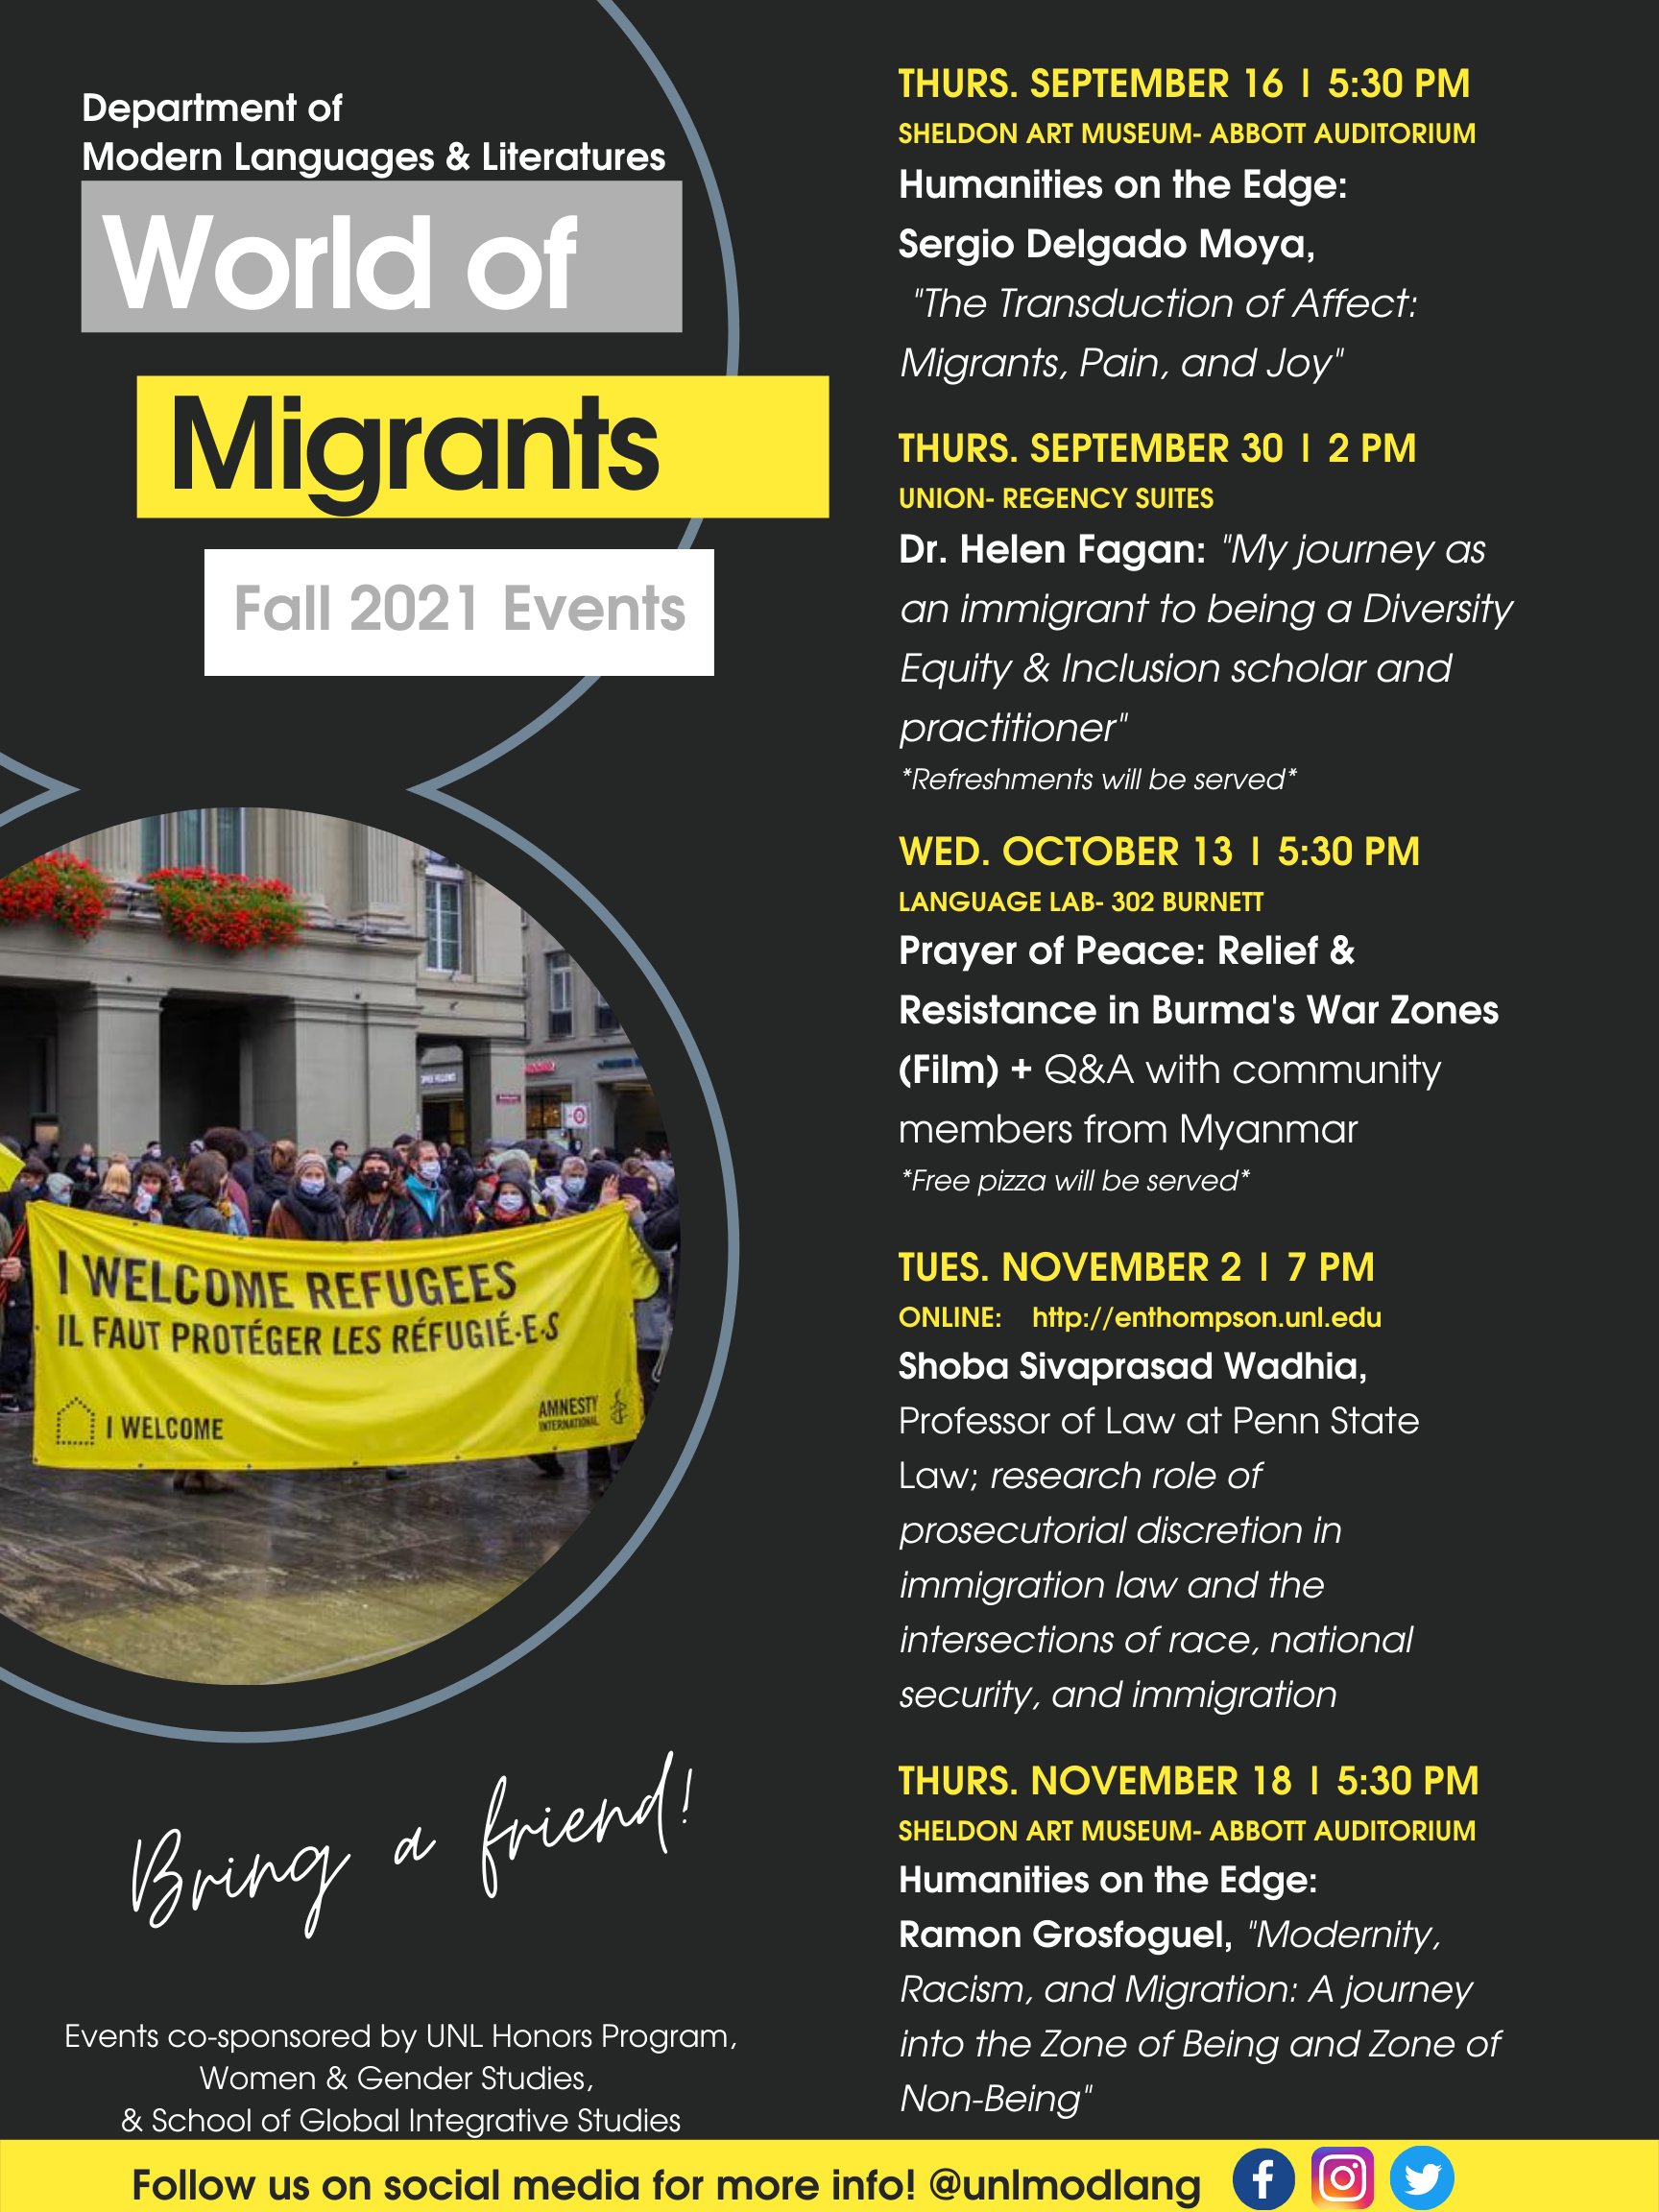 World of Migrants Fall 2021 Events